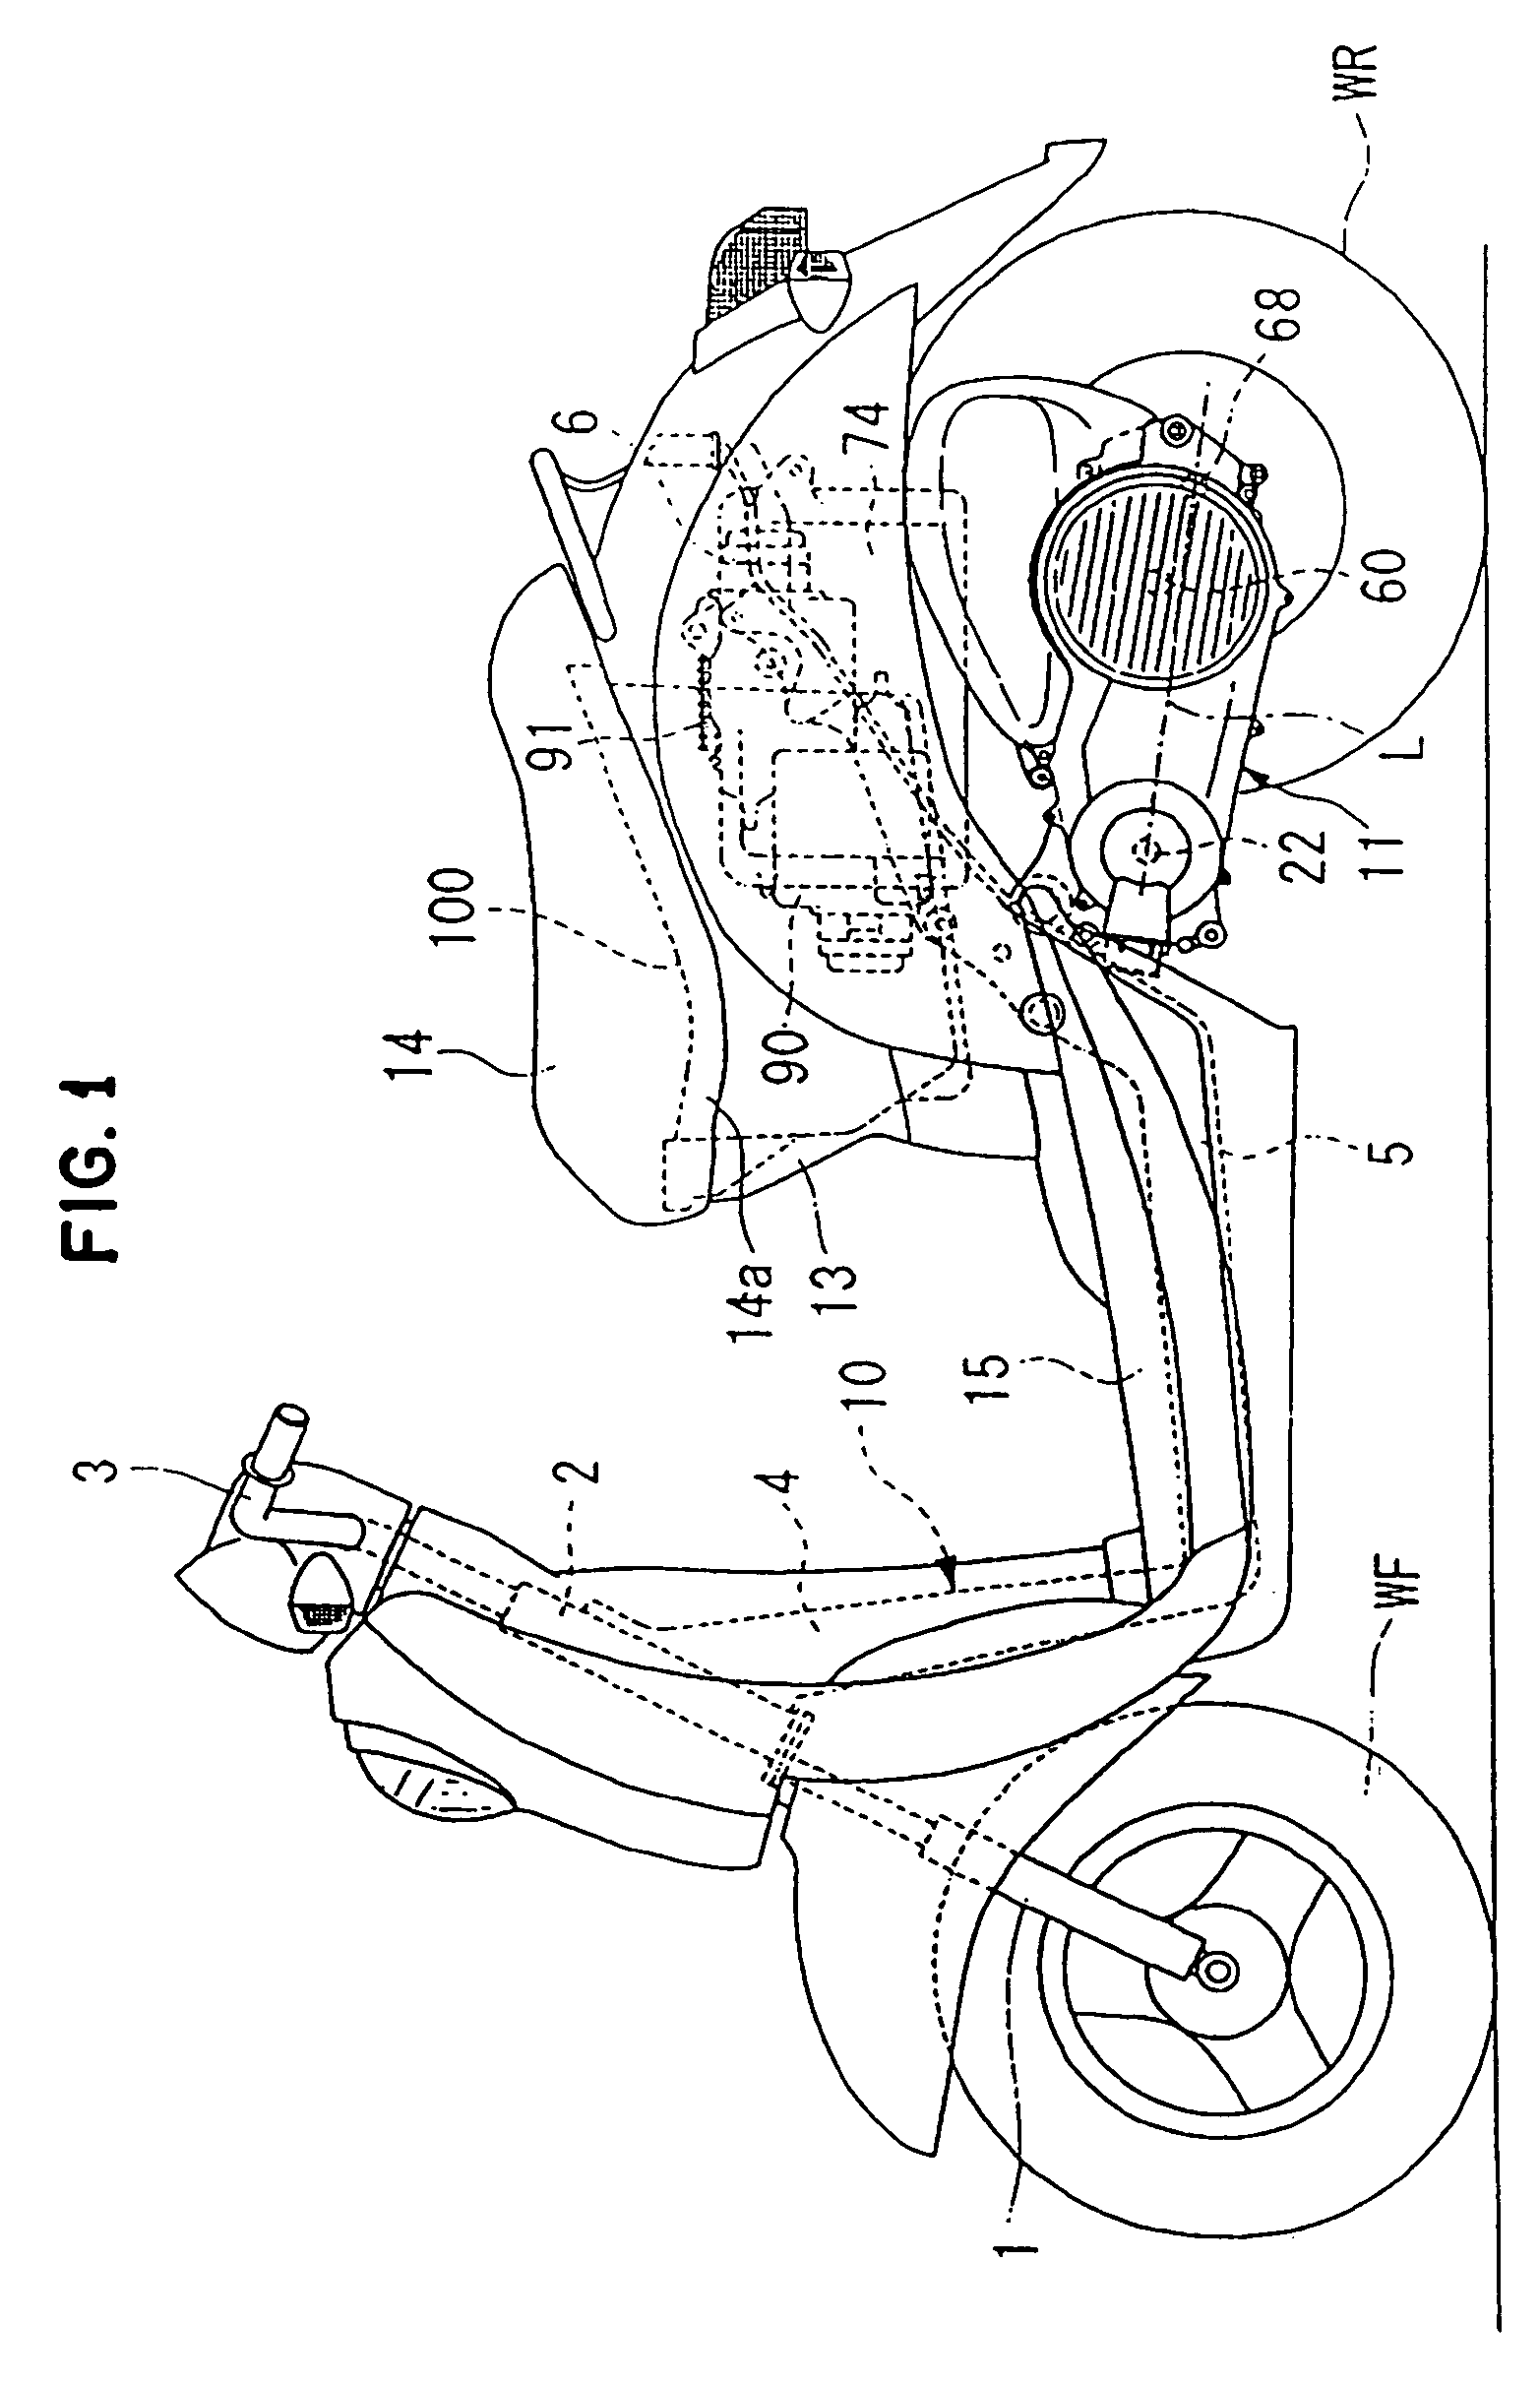 Battery arrangement and battery mounting structure for a vehicle